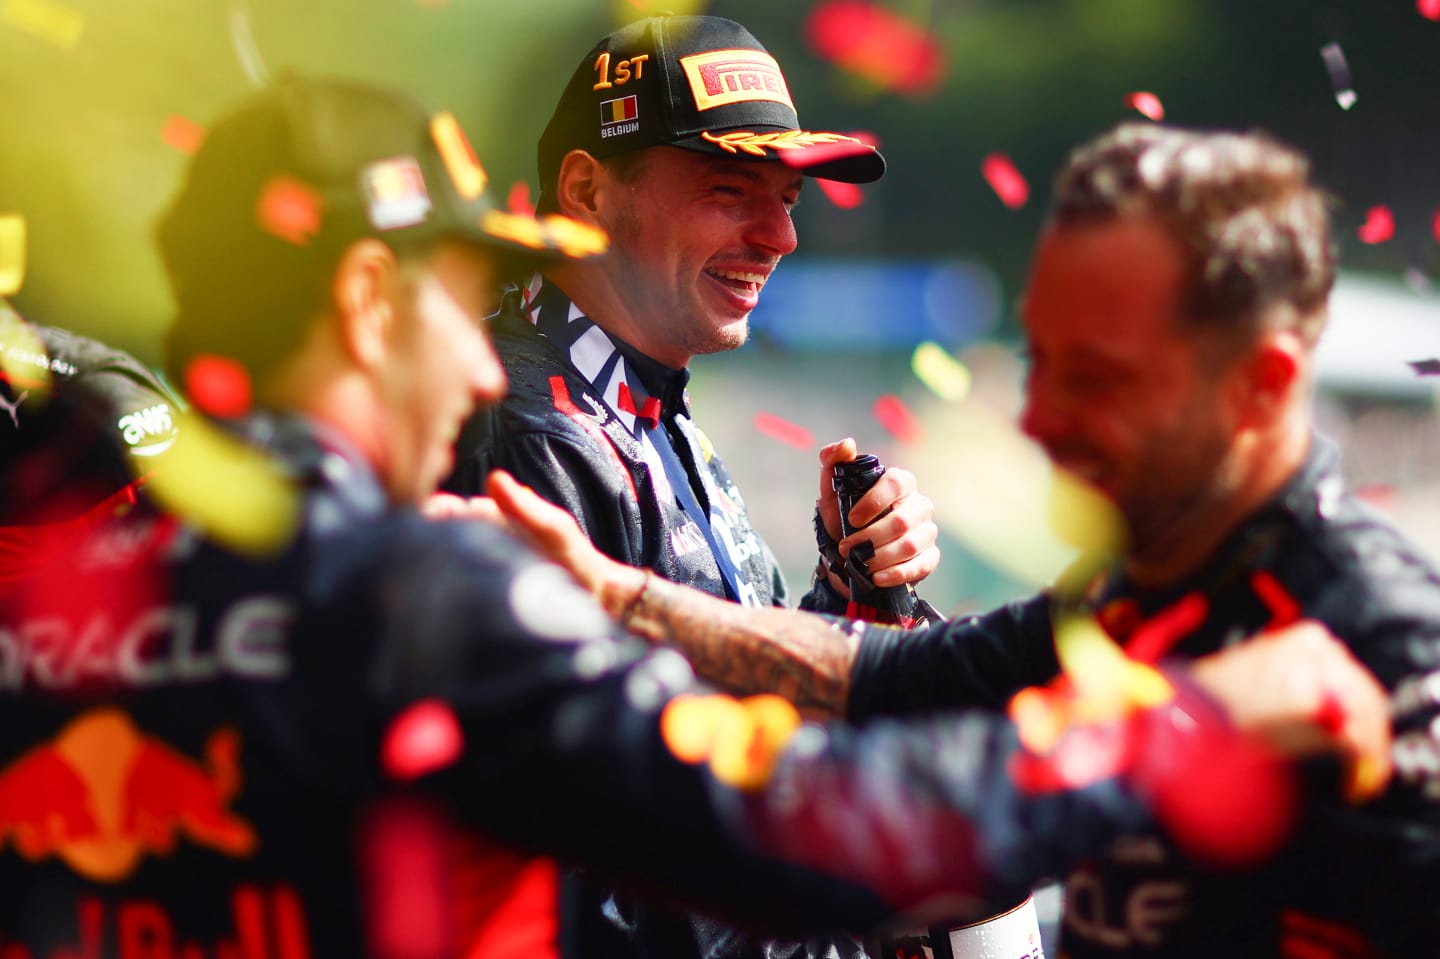 SPA, BELGIUM - JULY 30: Race winner Max Verstappen of the Netherlands and Oracle Red Bull Racing